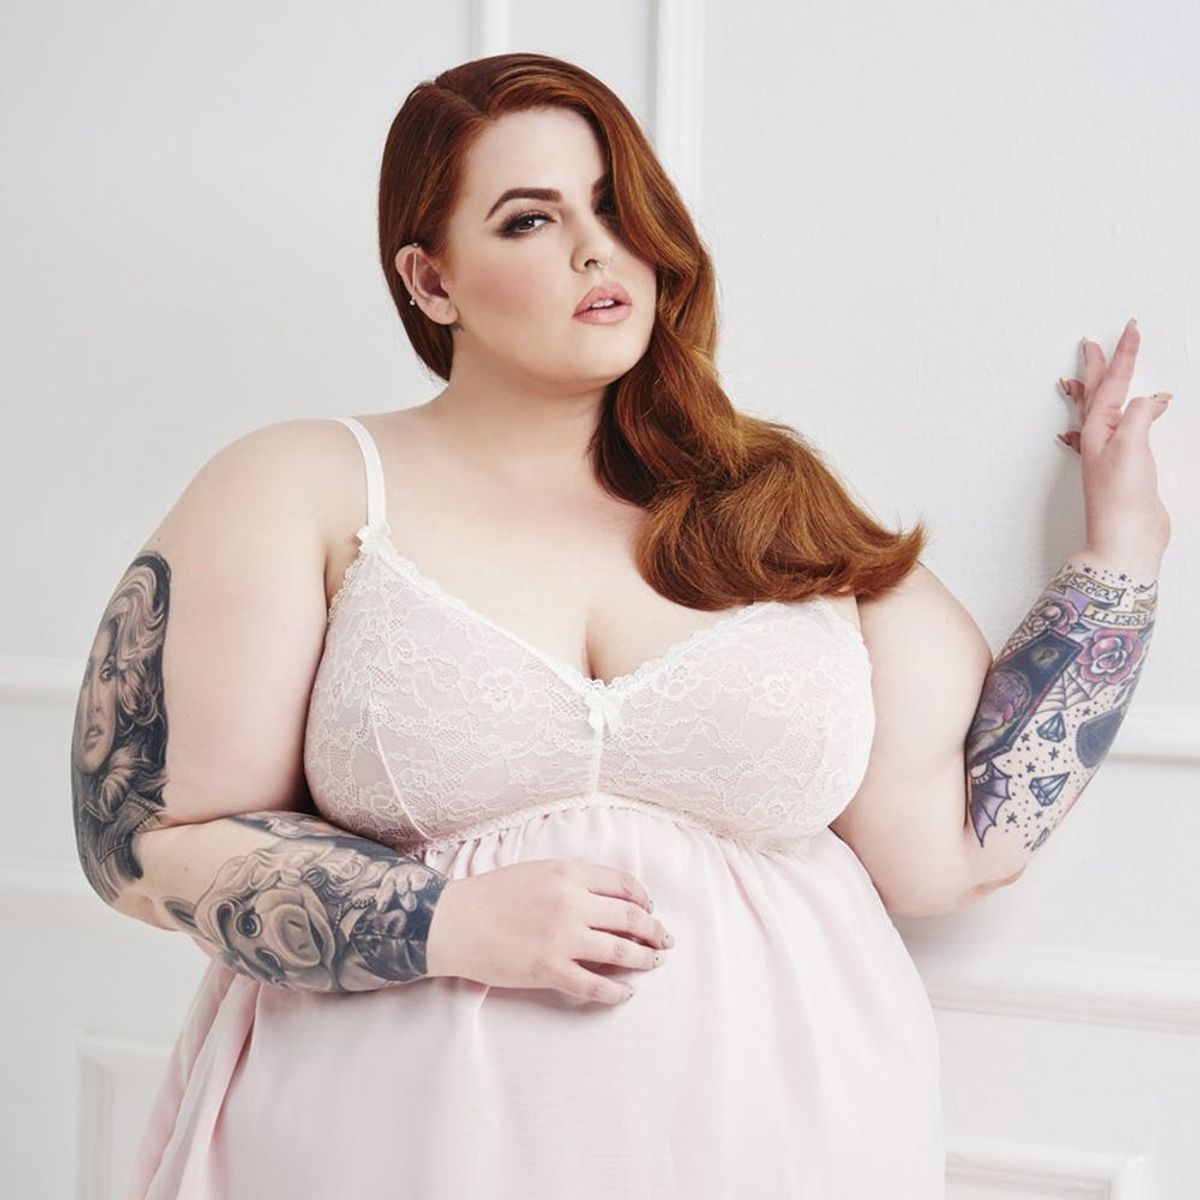 See Model Tess Holliday’s Gorgeous Plus-Size Spring Fashion Campaign